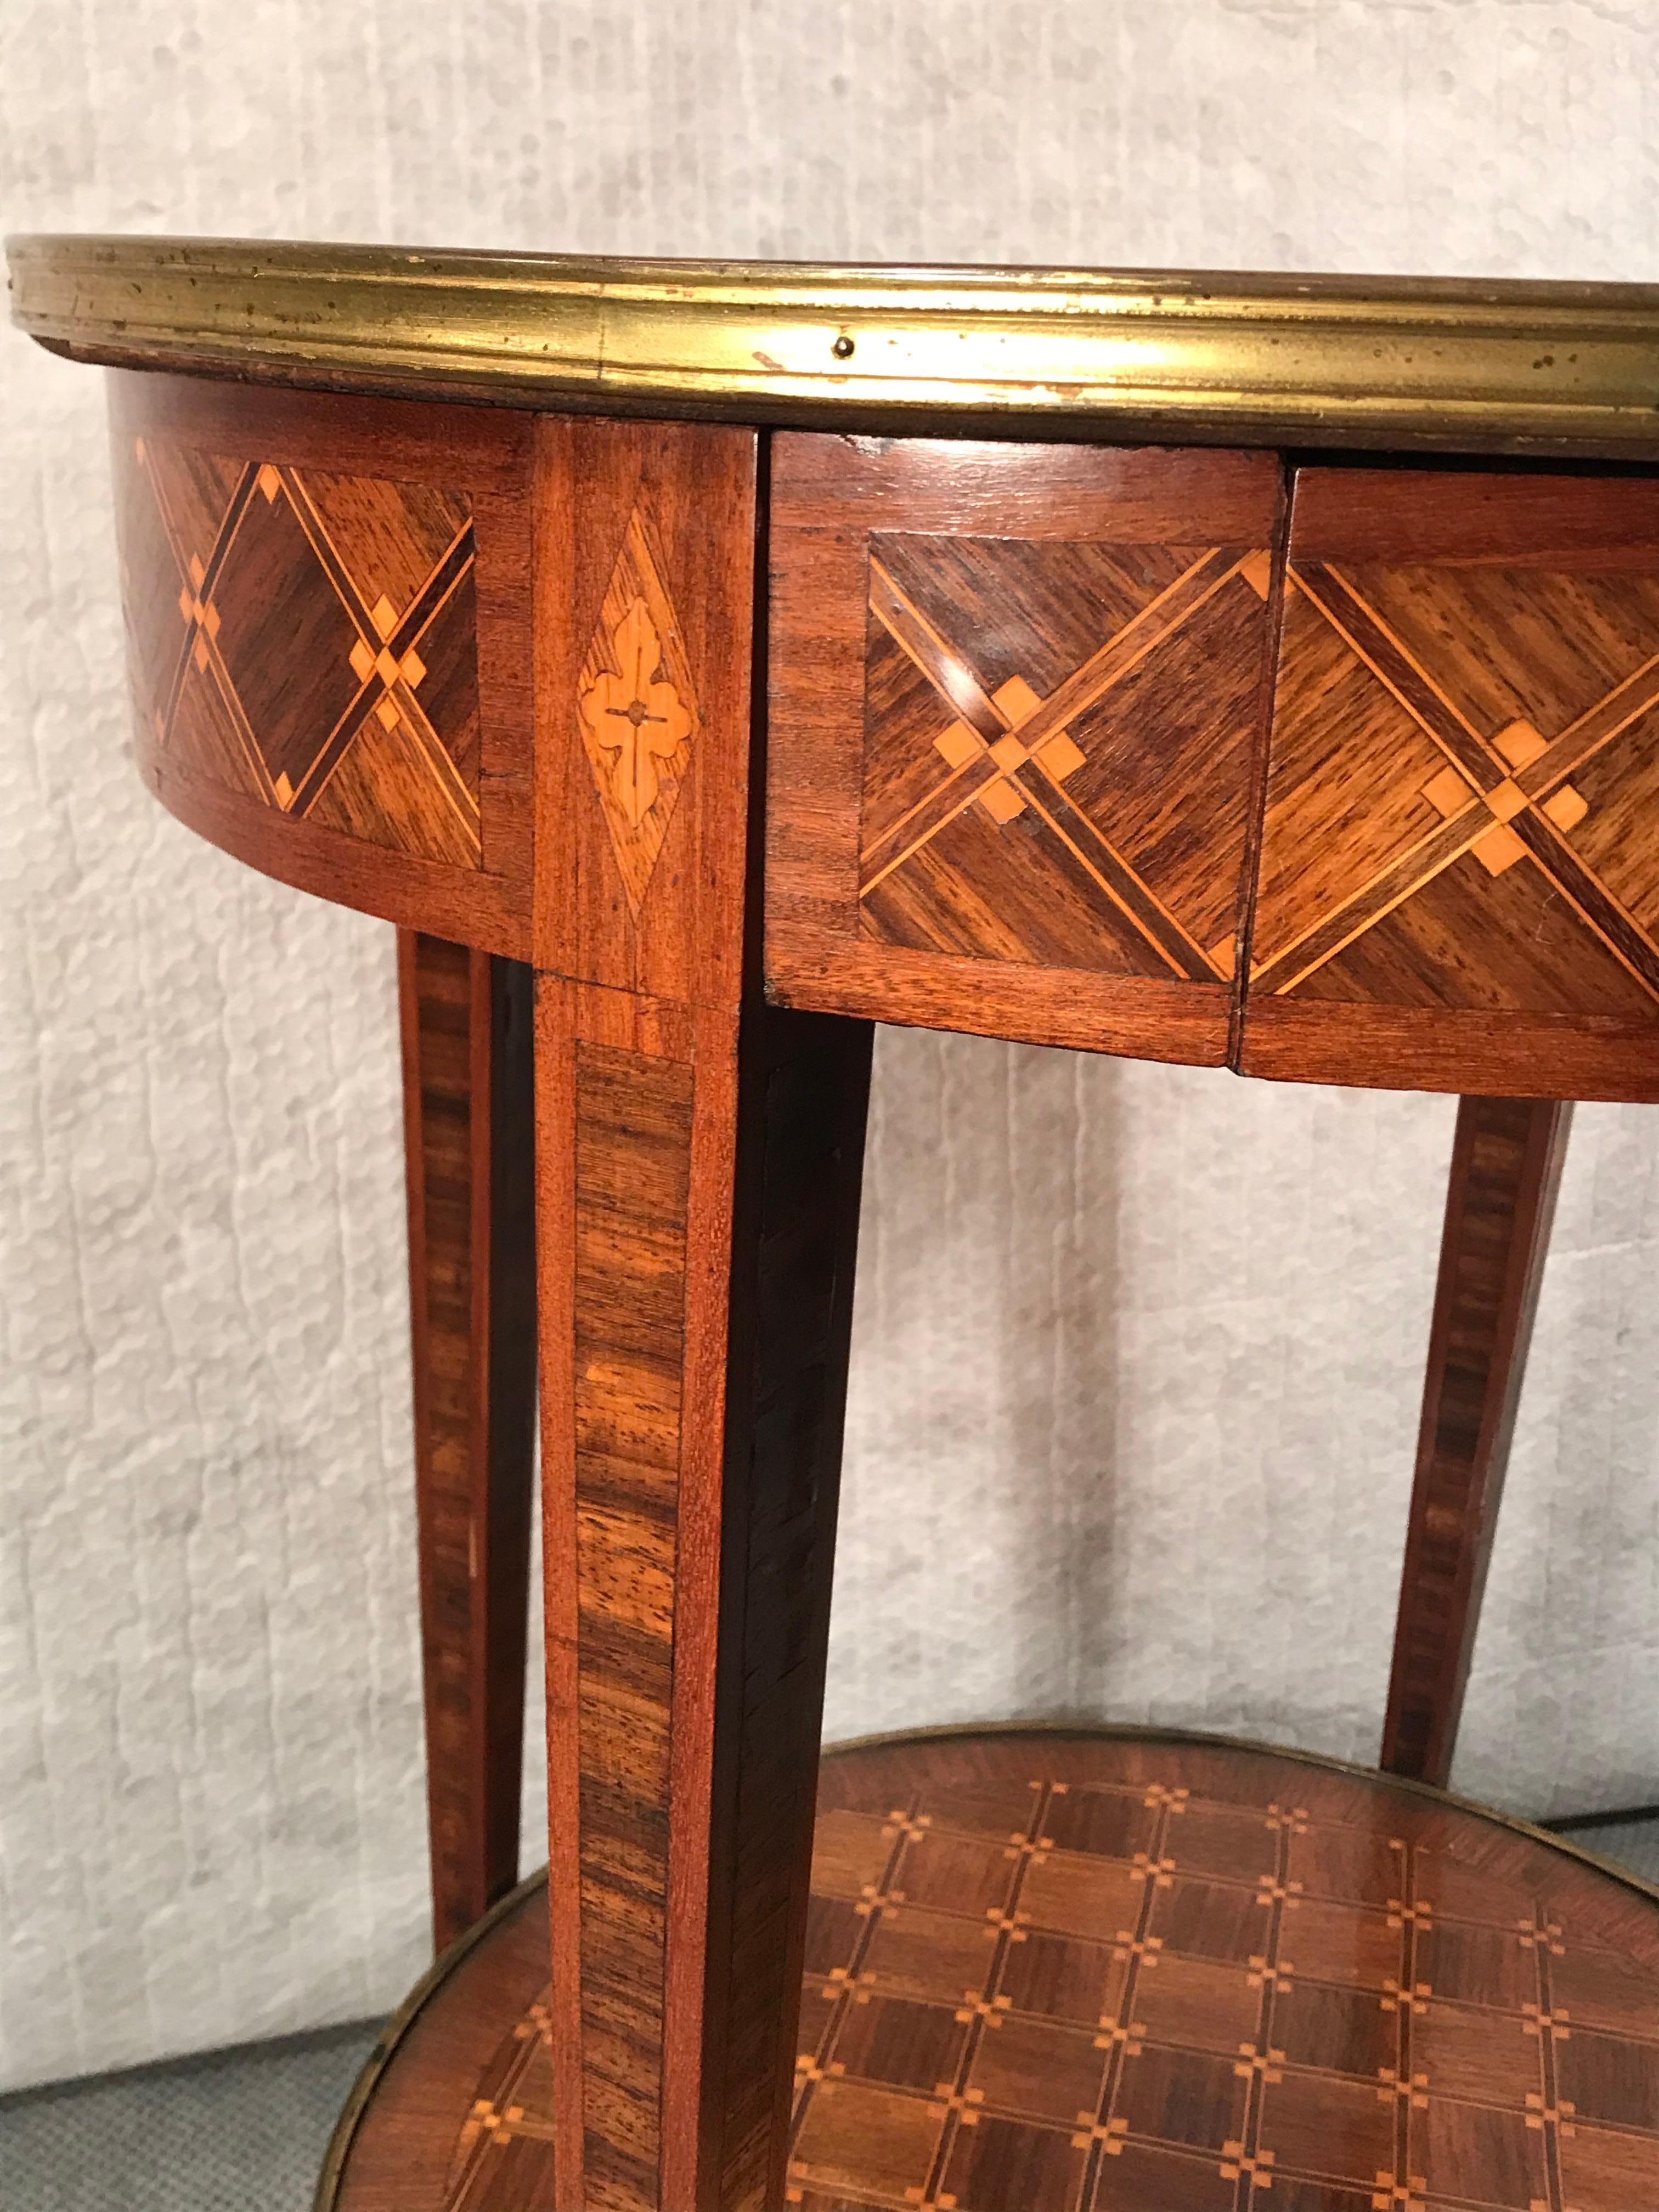 Louis XVI Style Gueridon, France circa 1890.
Beautiful marquetry in walnut, rosewood and satinwood. The table is in good original condition.
